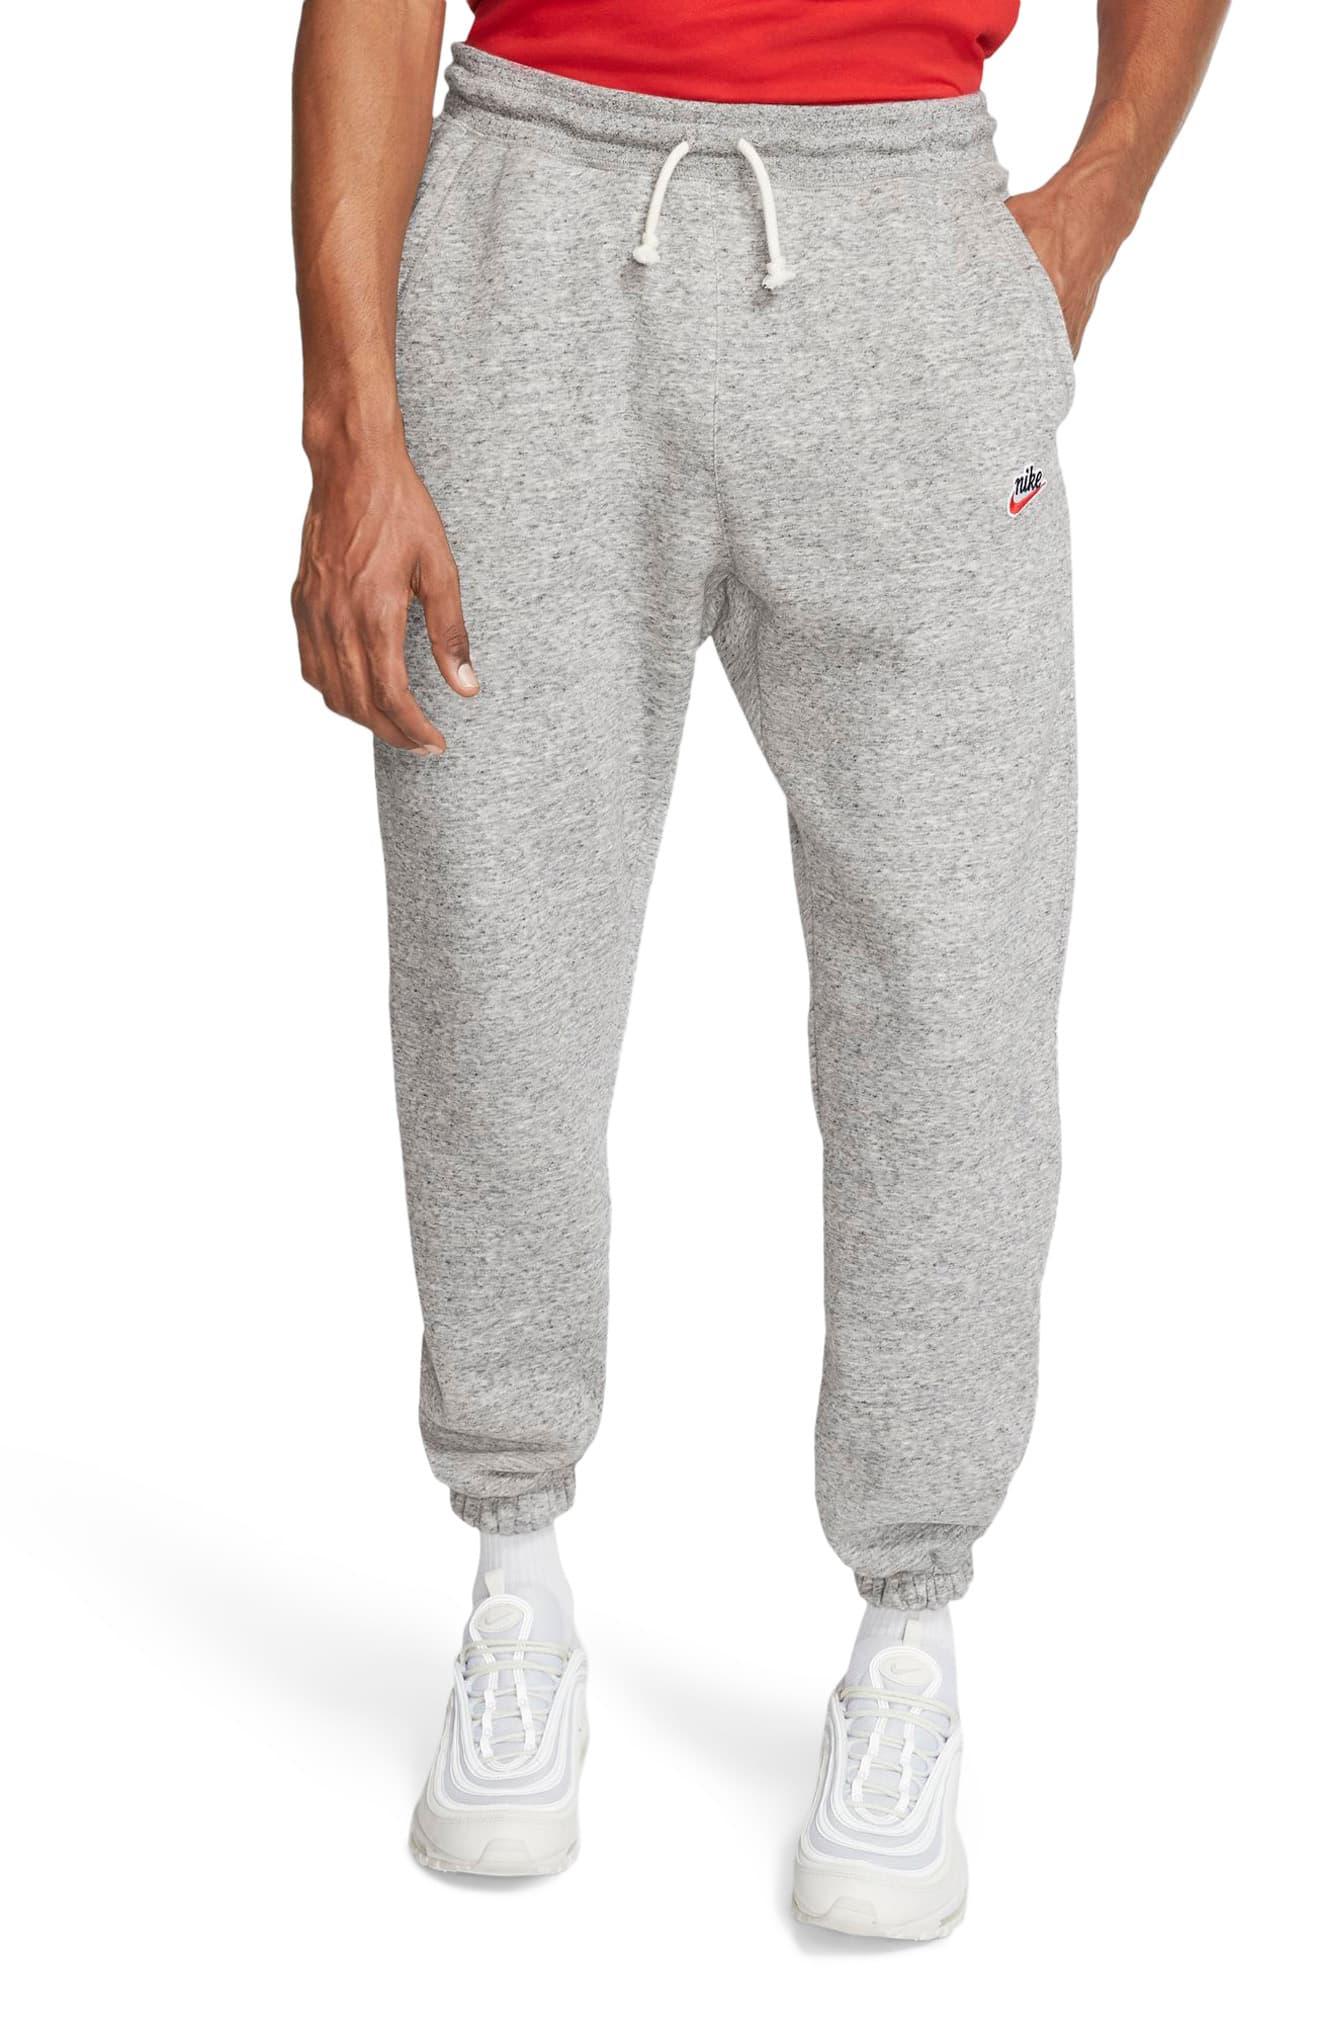 Nike Cotton Sportswear Heritage Jogger Sweatpants in Anthracite (Gray ...